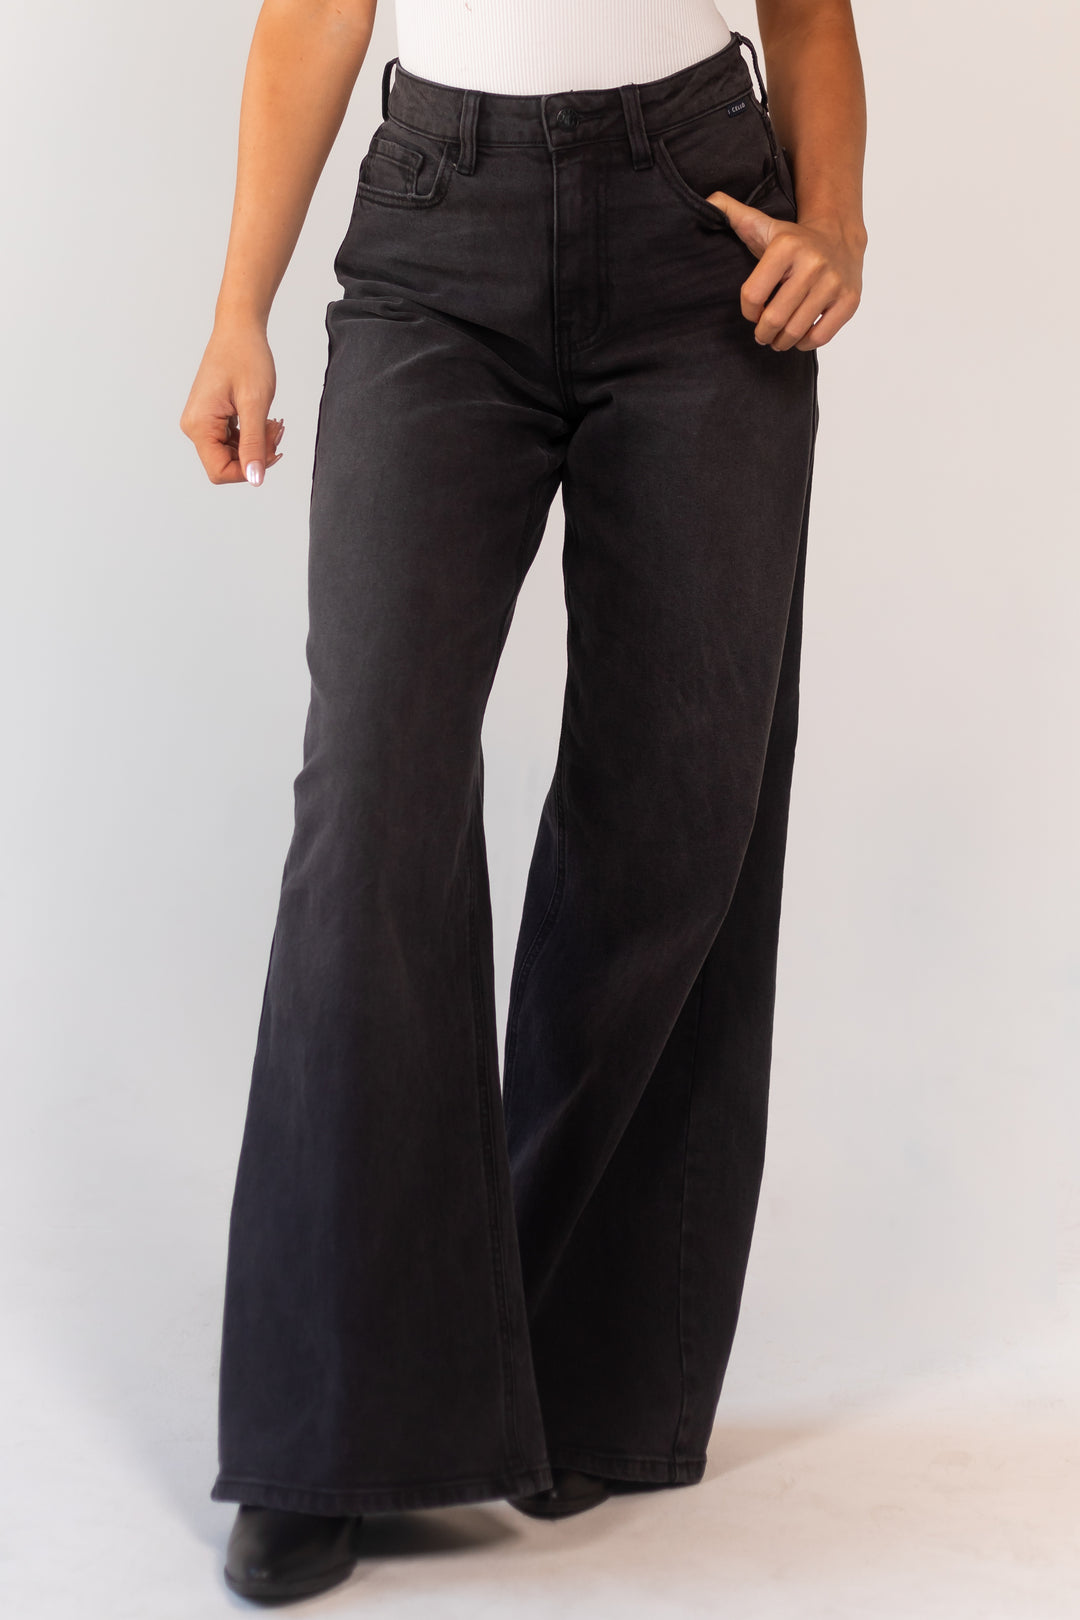 Cello Washed Black Vintage Zipper Fly Wide Leg Jeans & Lime Lush